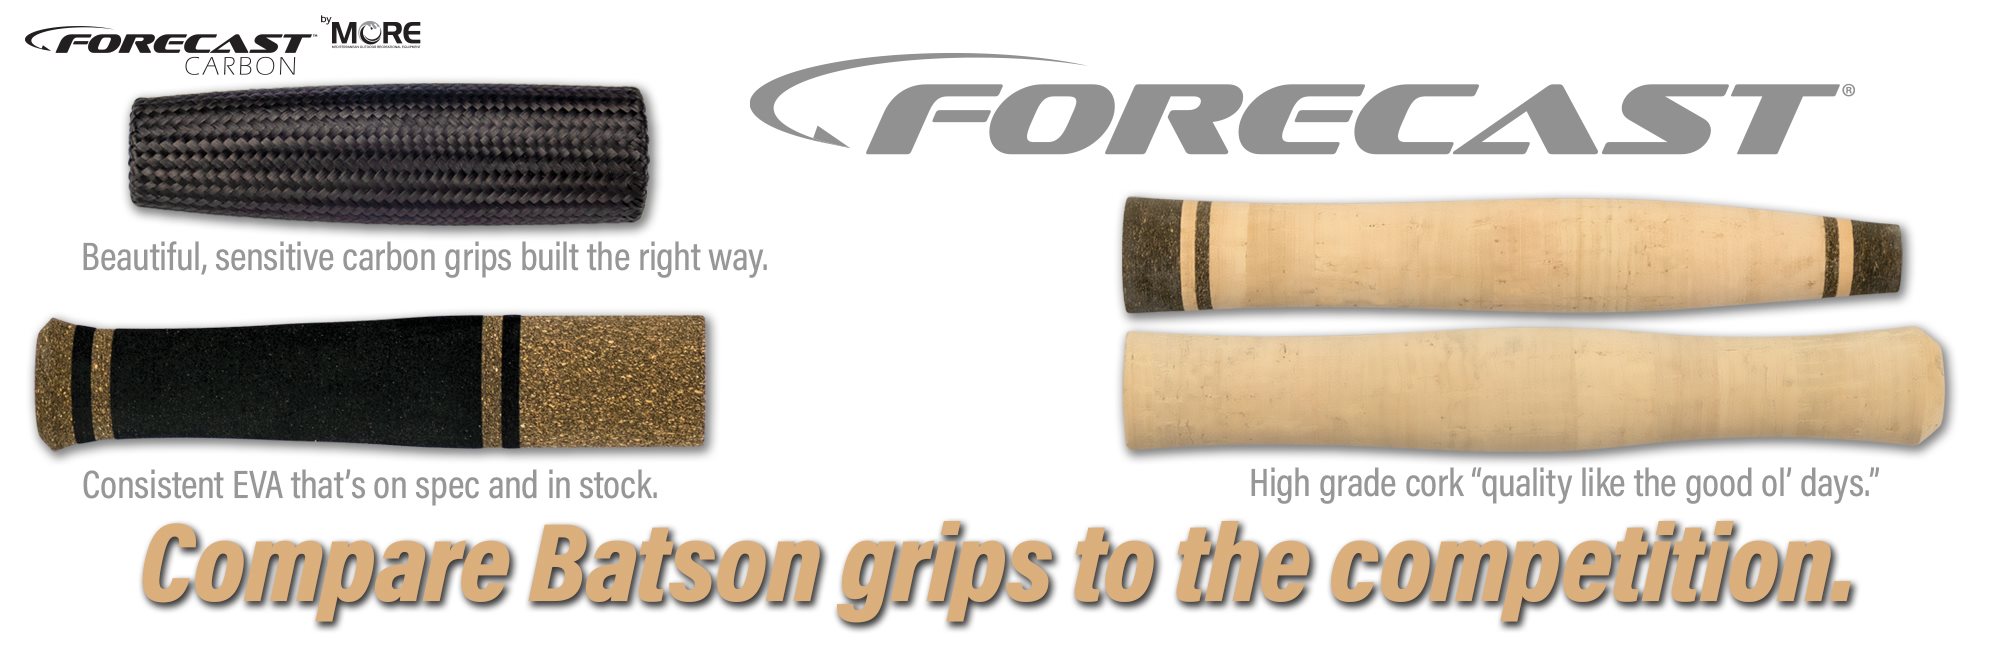 Home Page Banner - Forecast Grips